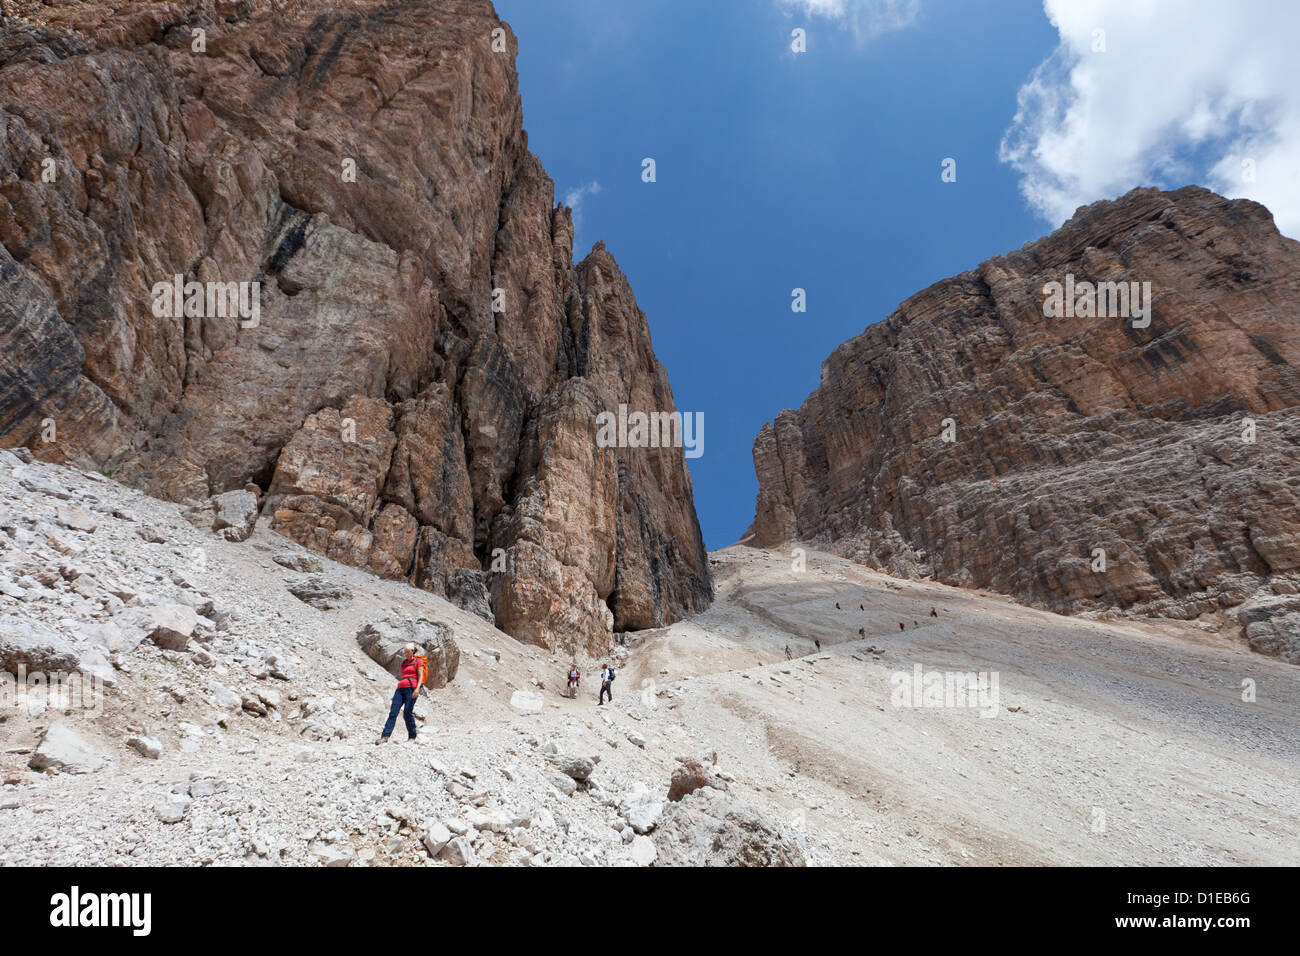 Hiking on the high route 2 in the Dolomites, Bolzano Province, Trentino-Alto Adige/South Tyrol, Italy, Europe Stock Photo